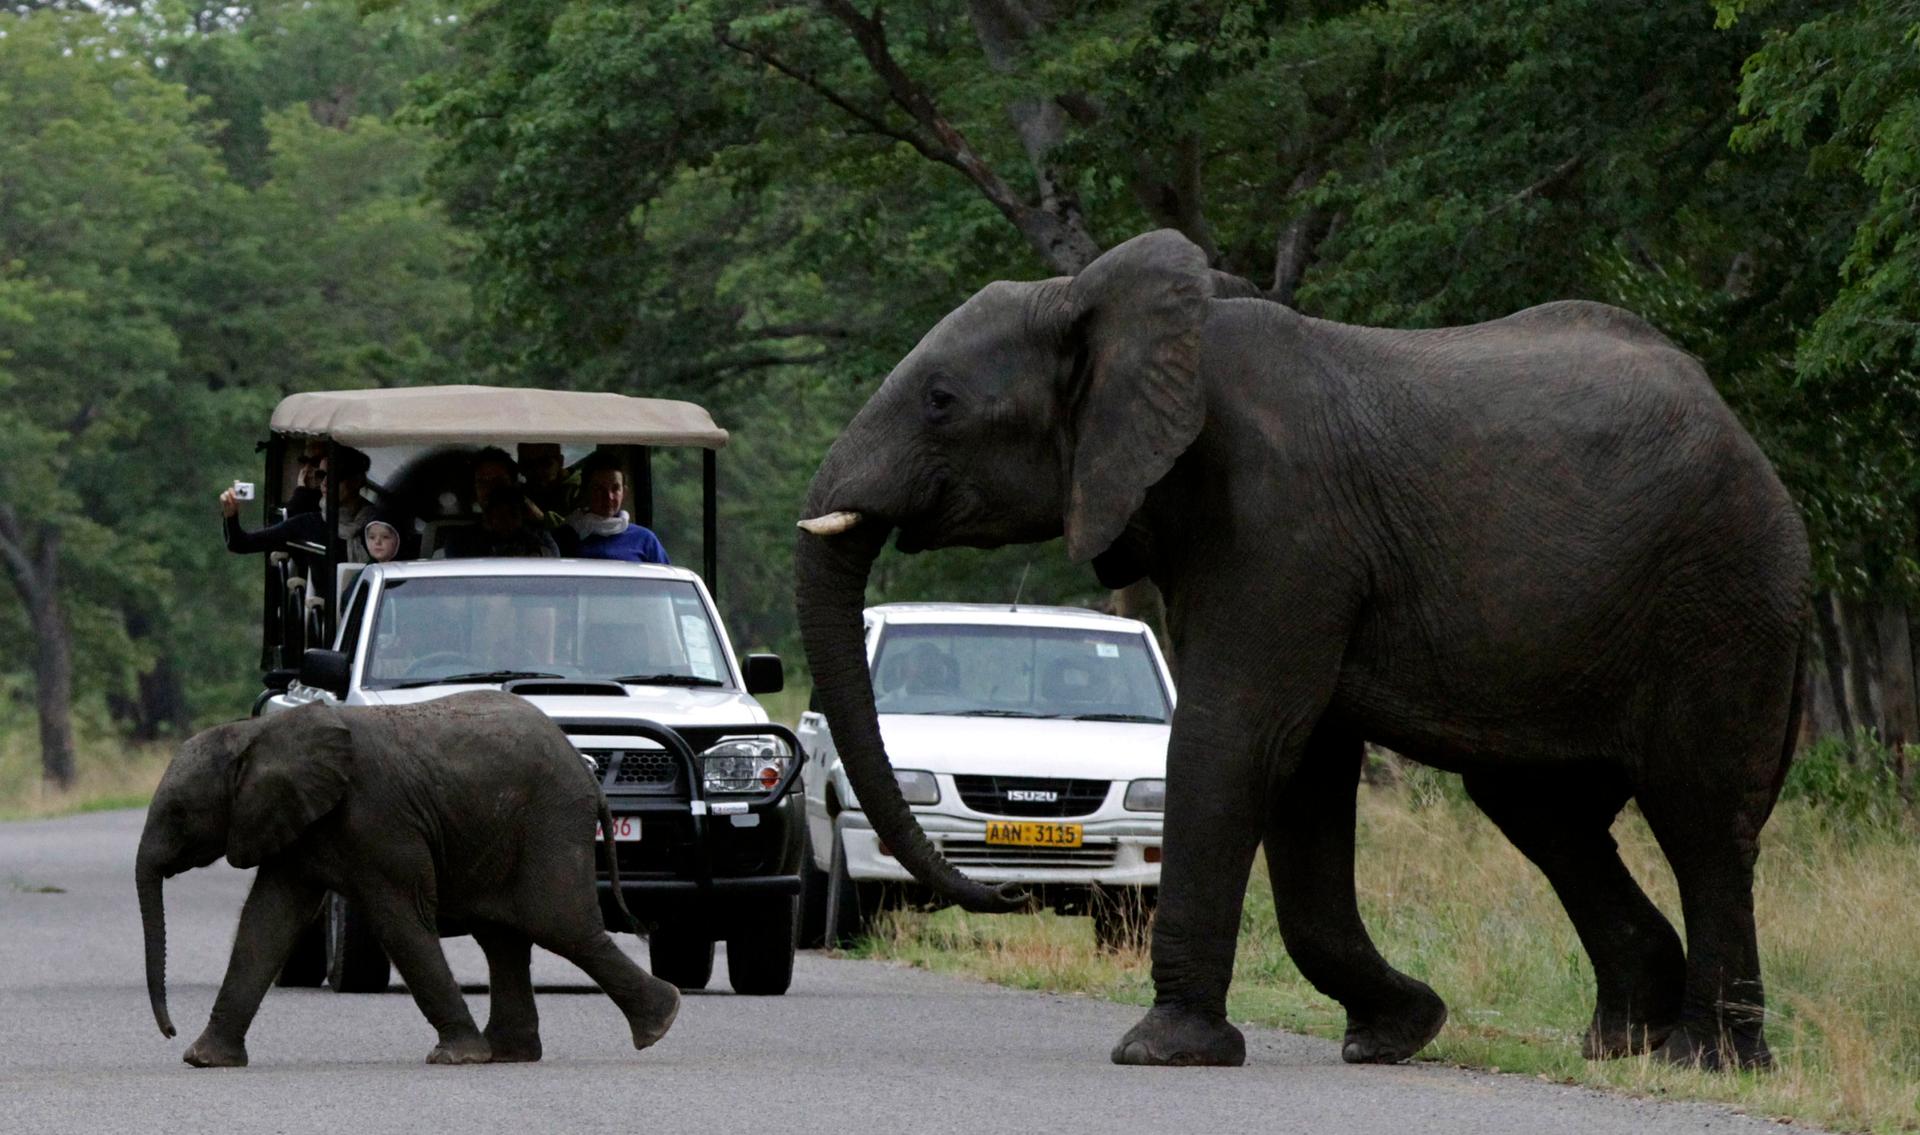 Visitors look on as an elephant and calf cross a road inside Zimbabwe's Hwange National Par